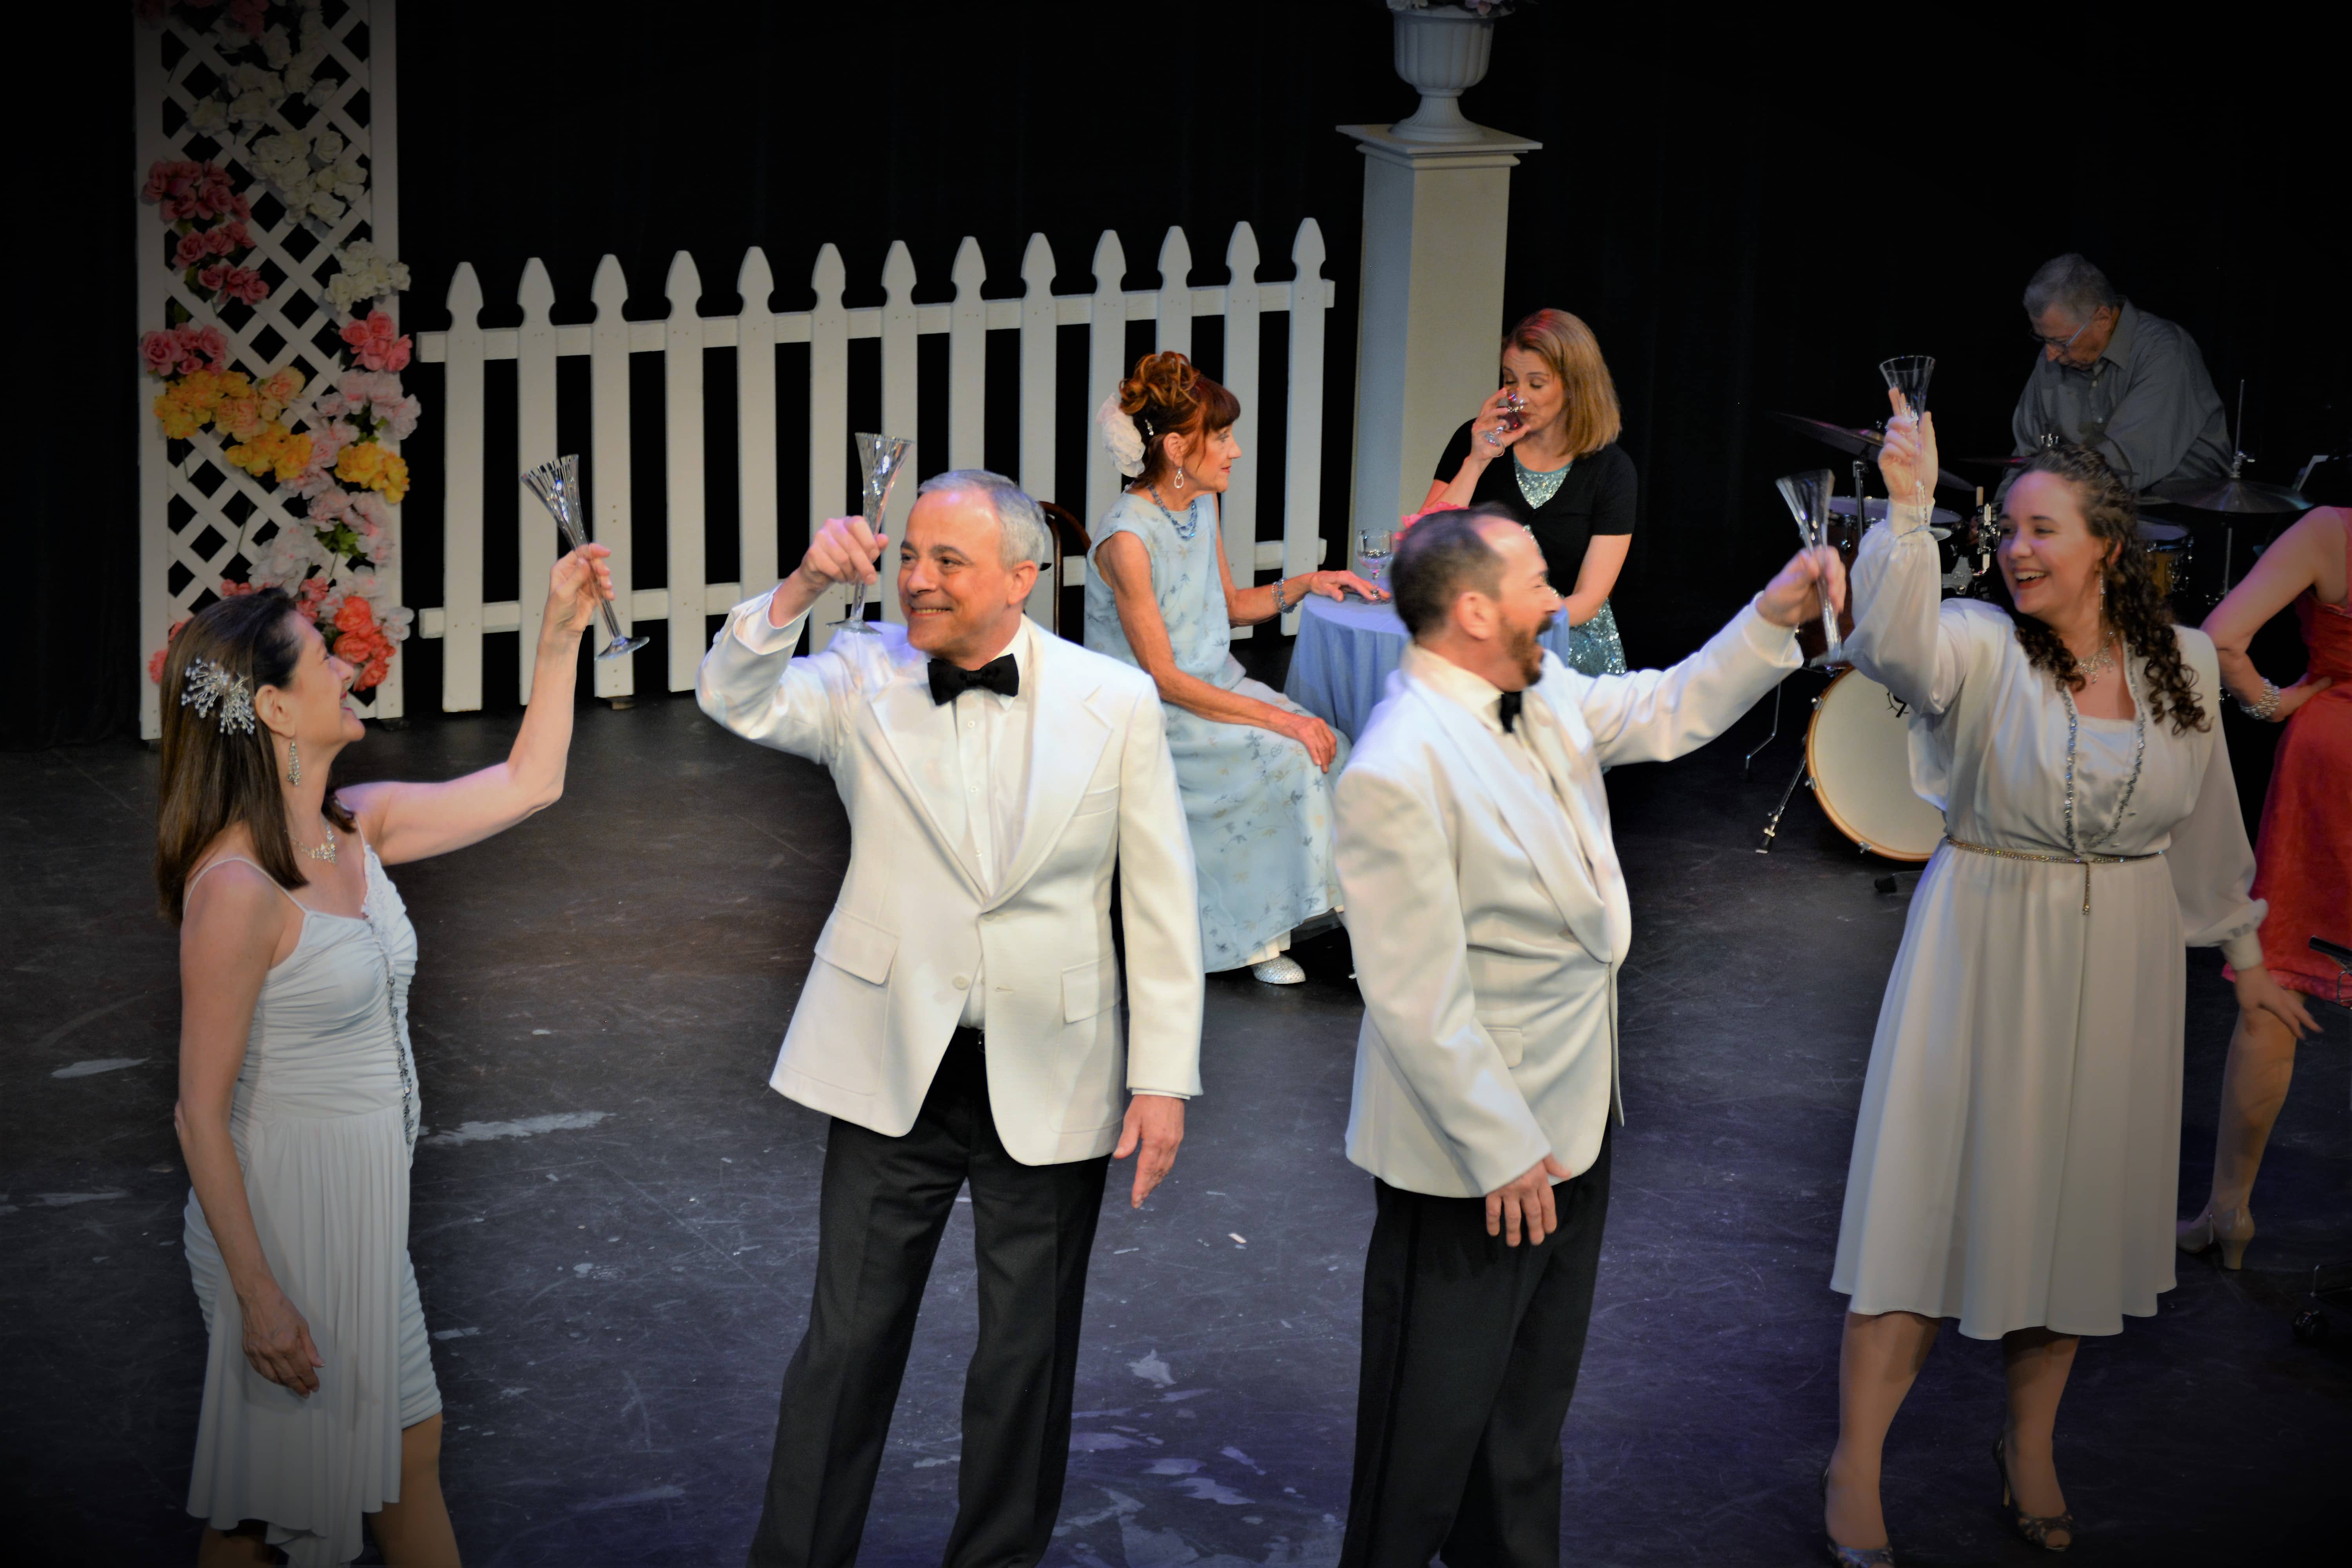 The cast of Bethesda Little Theater's A Swellegant, Elegant Party. Photo courtesy of Cathy McCoskey.